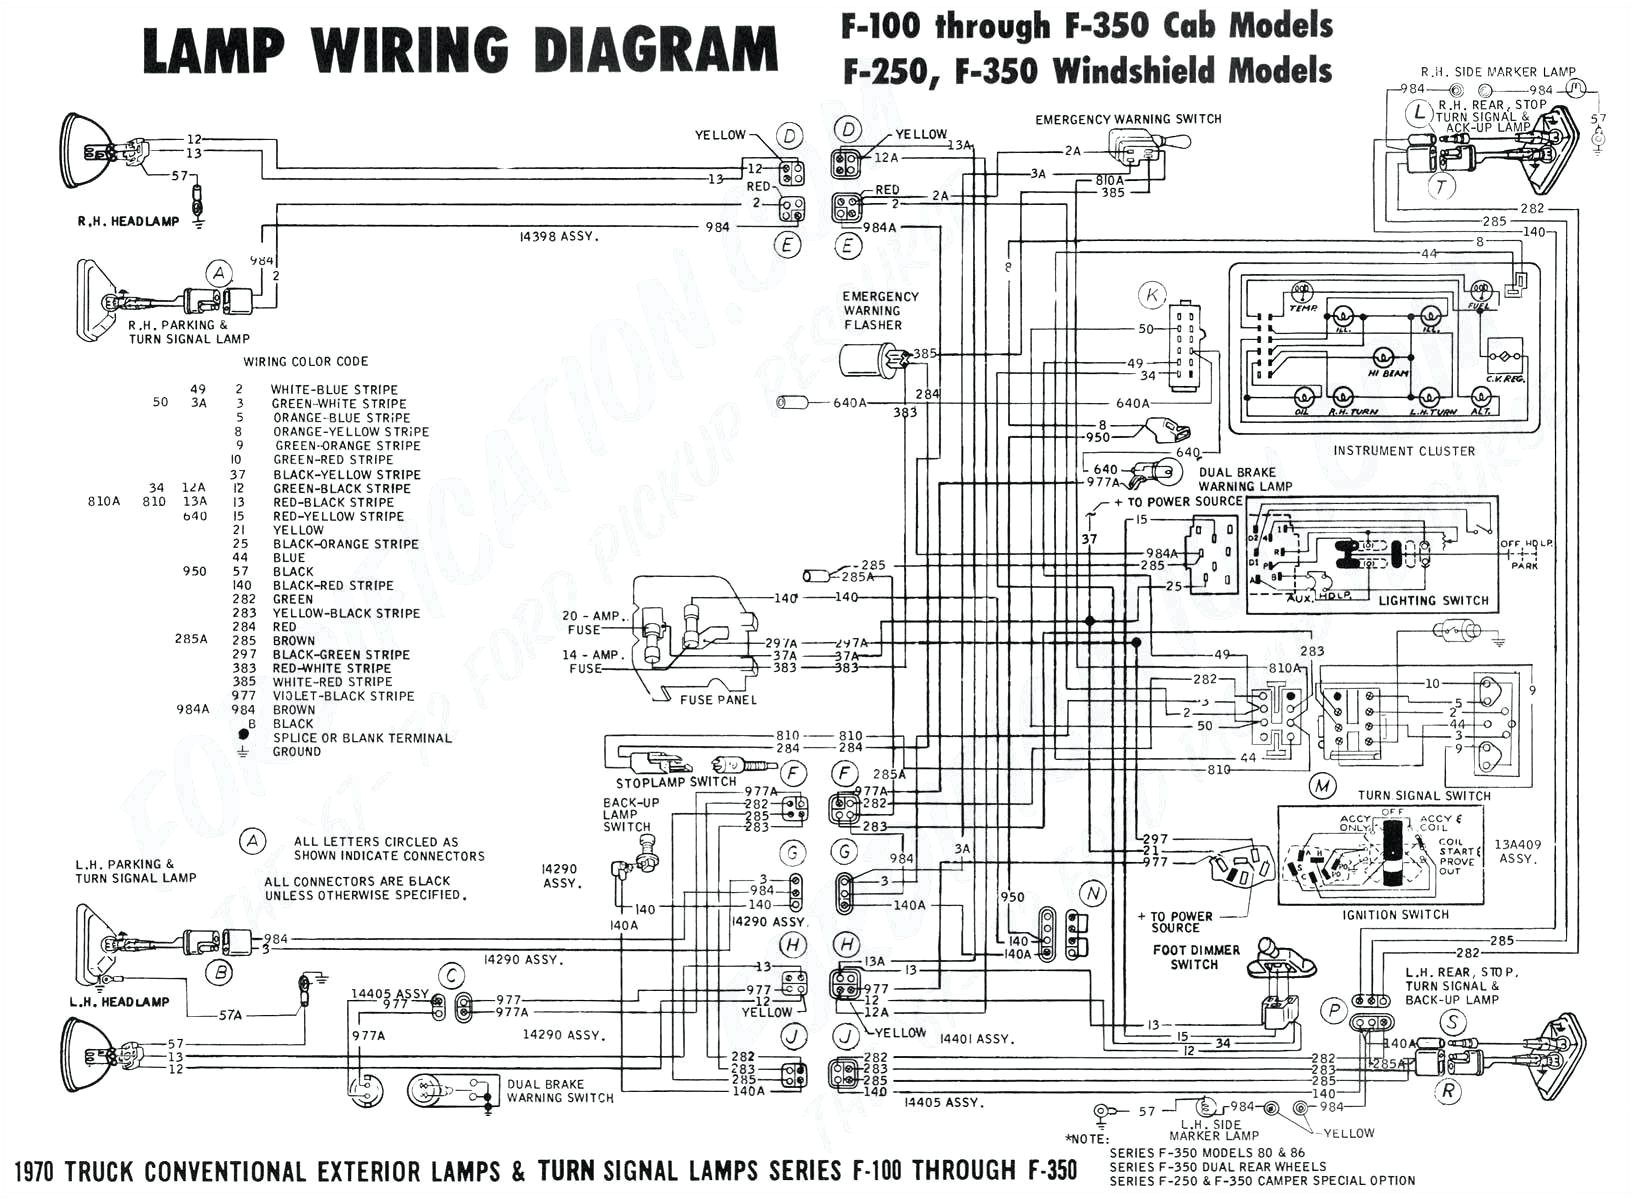 fuse box diagram moreover buick century engine furthermore buick 2002 buick rendezvous fuse diagram moreover engine vacuum line diagram